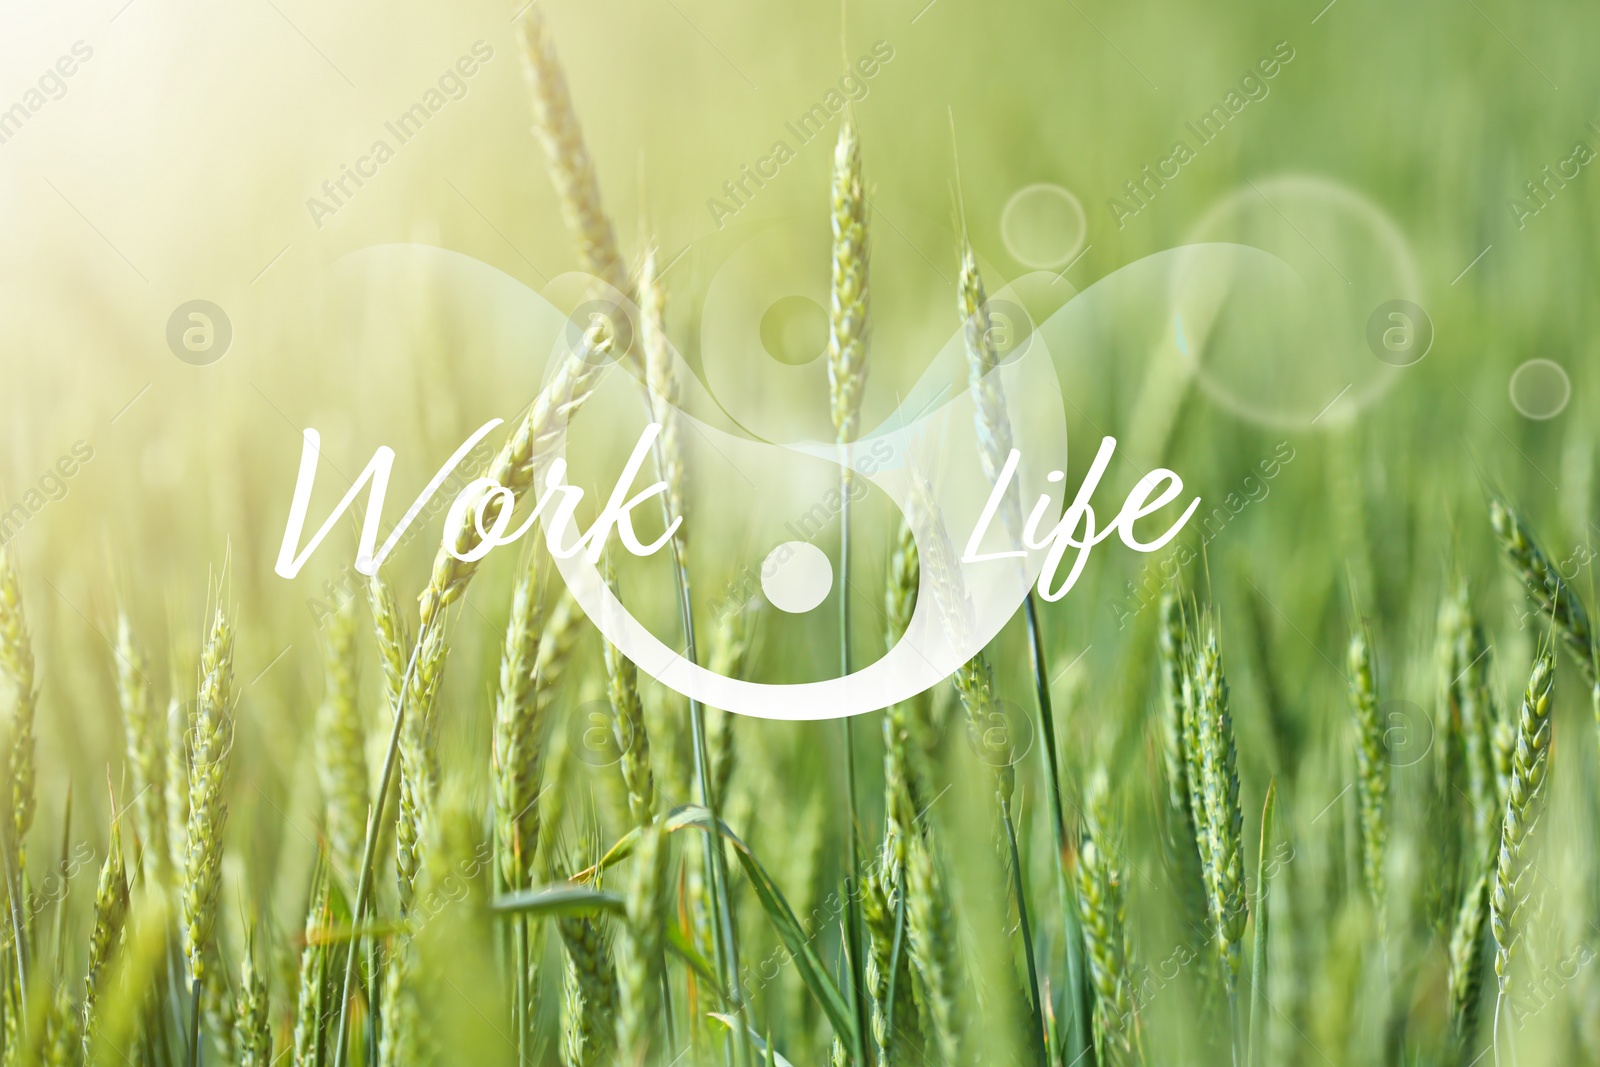 Image of Wheat field on sunny day. Concept of balance between work and life